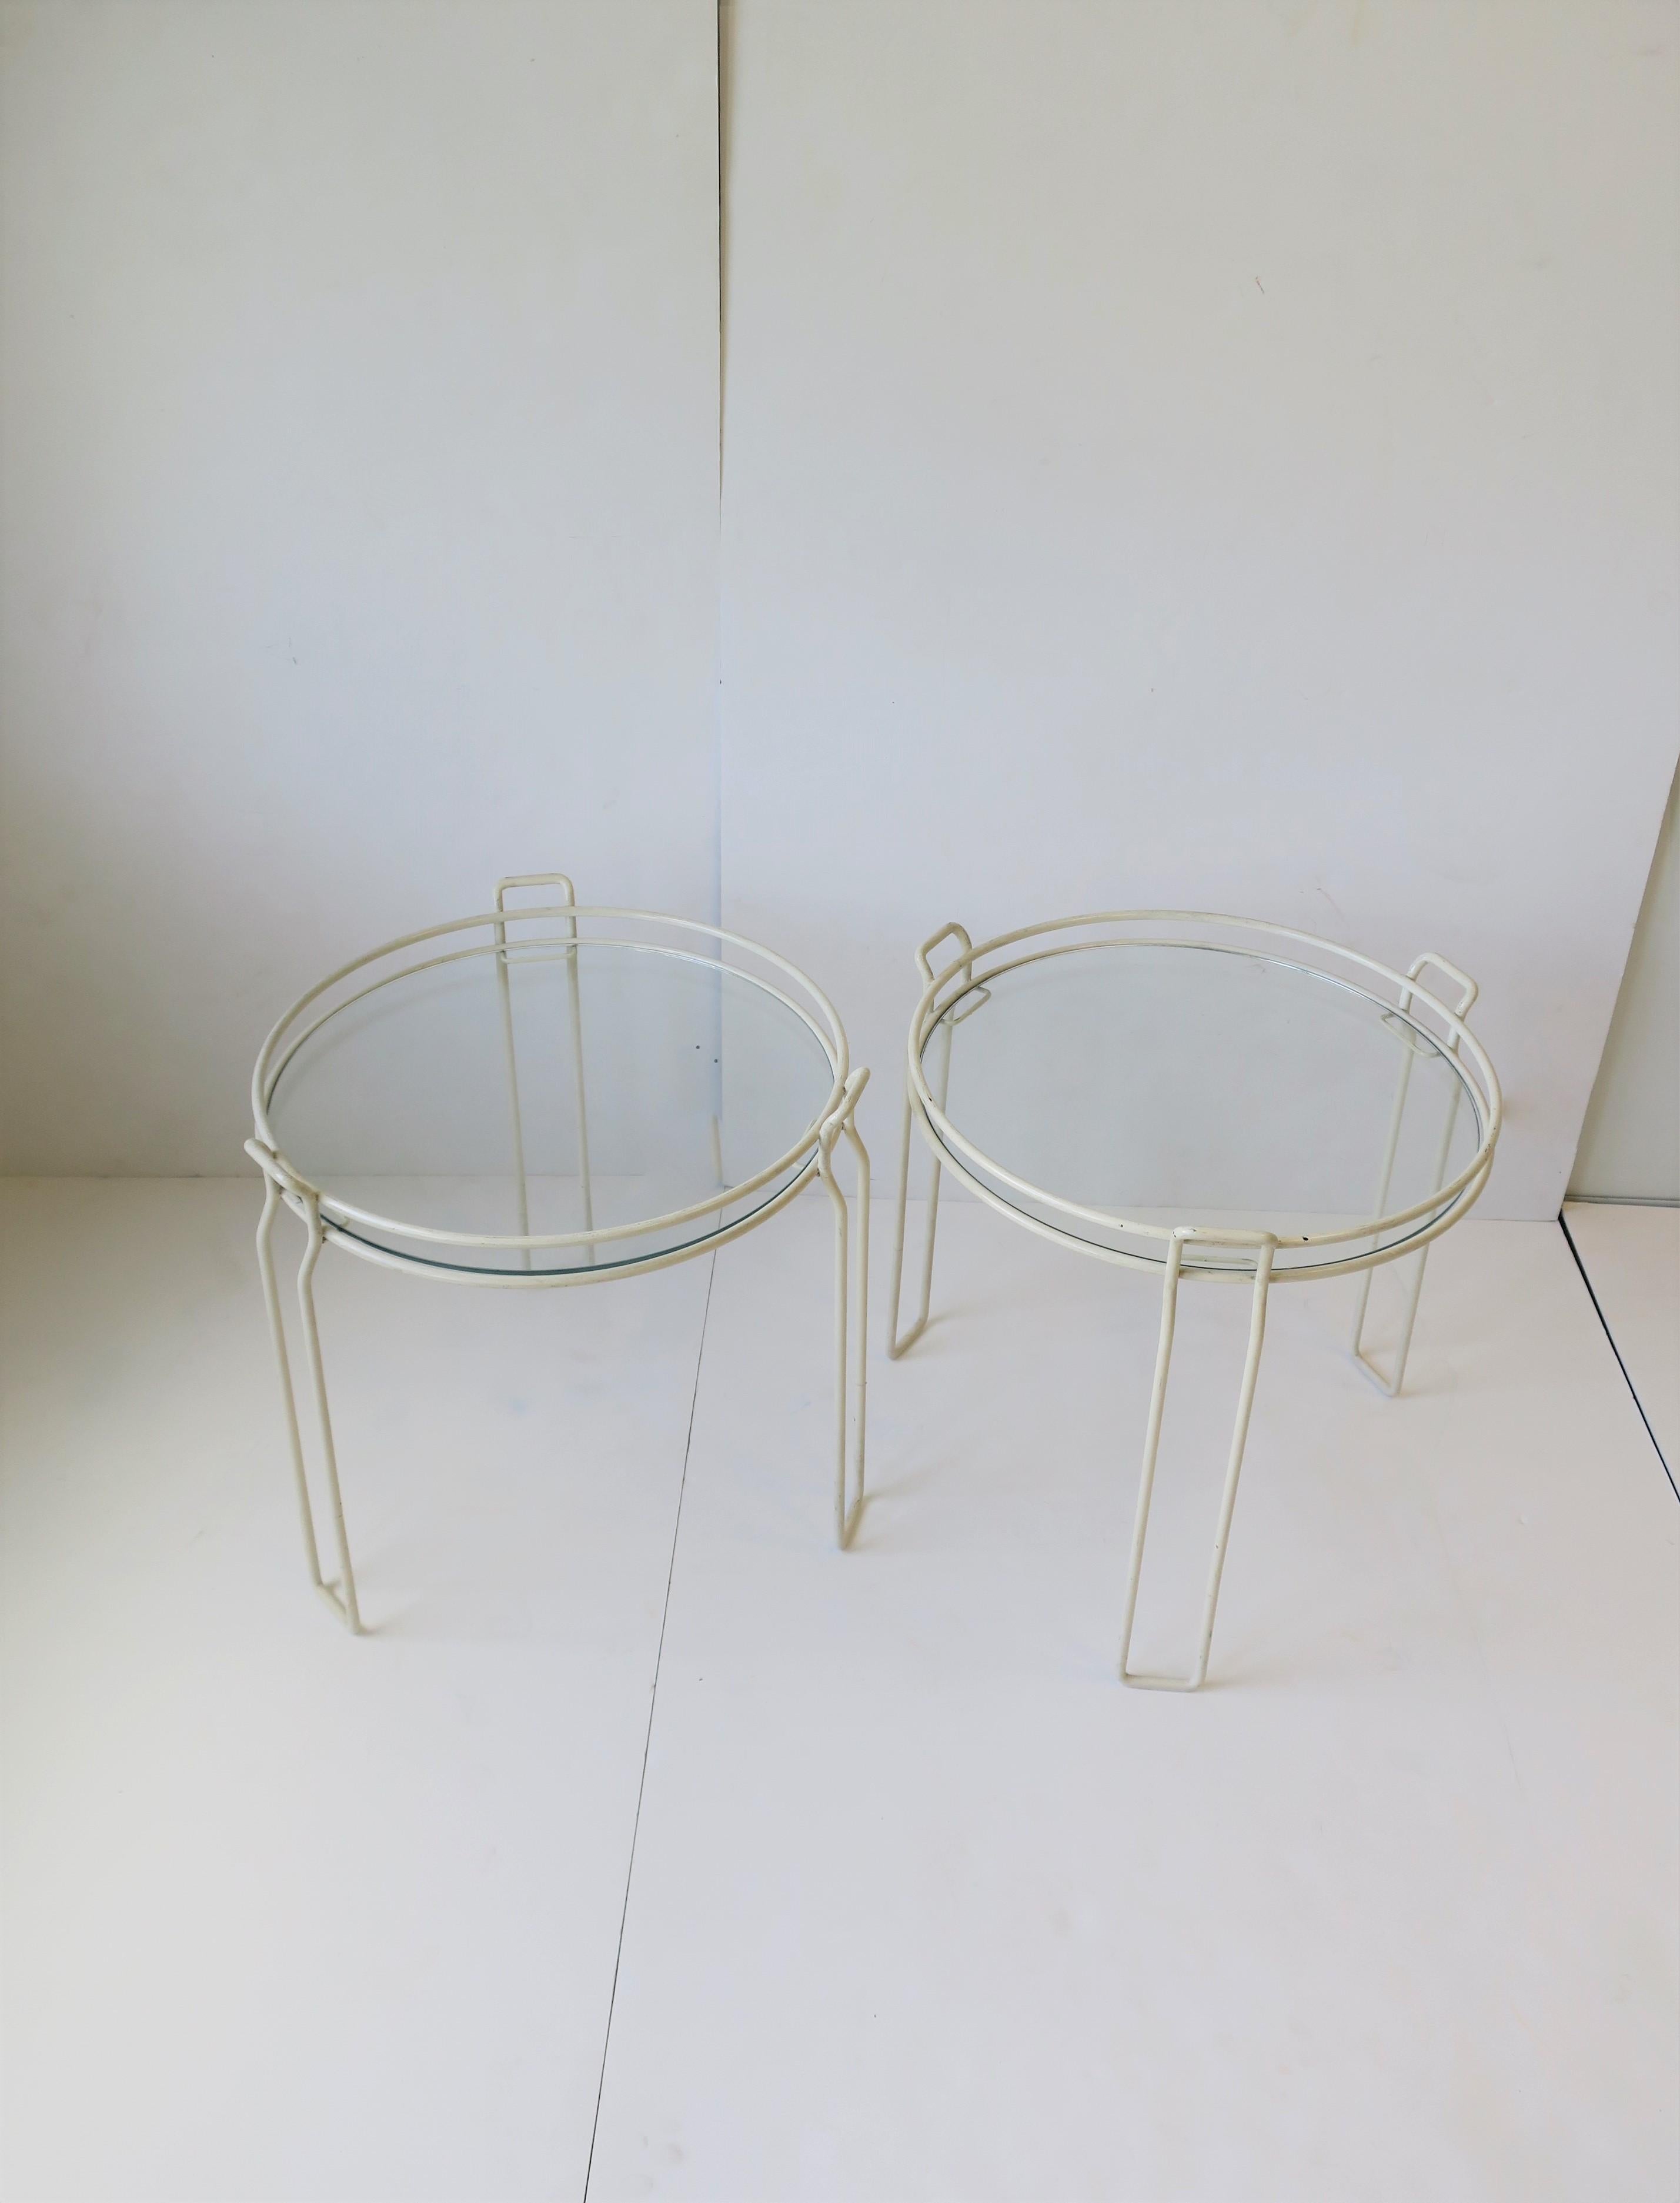 Mid-Century Modern Midcentury Modern White Side Drinks Nesting or Stacking Tables, Pair, 1960s For Sale